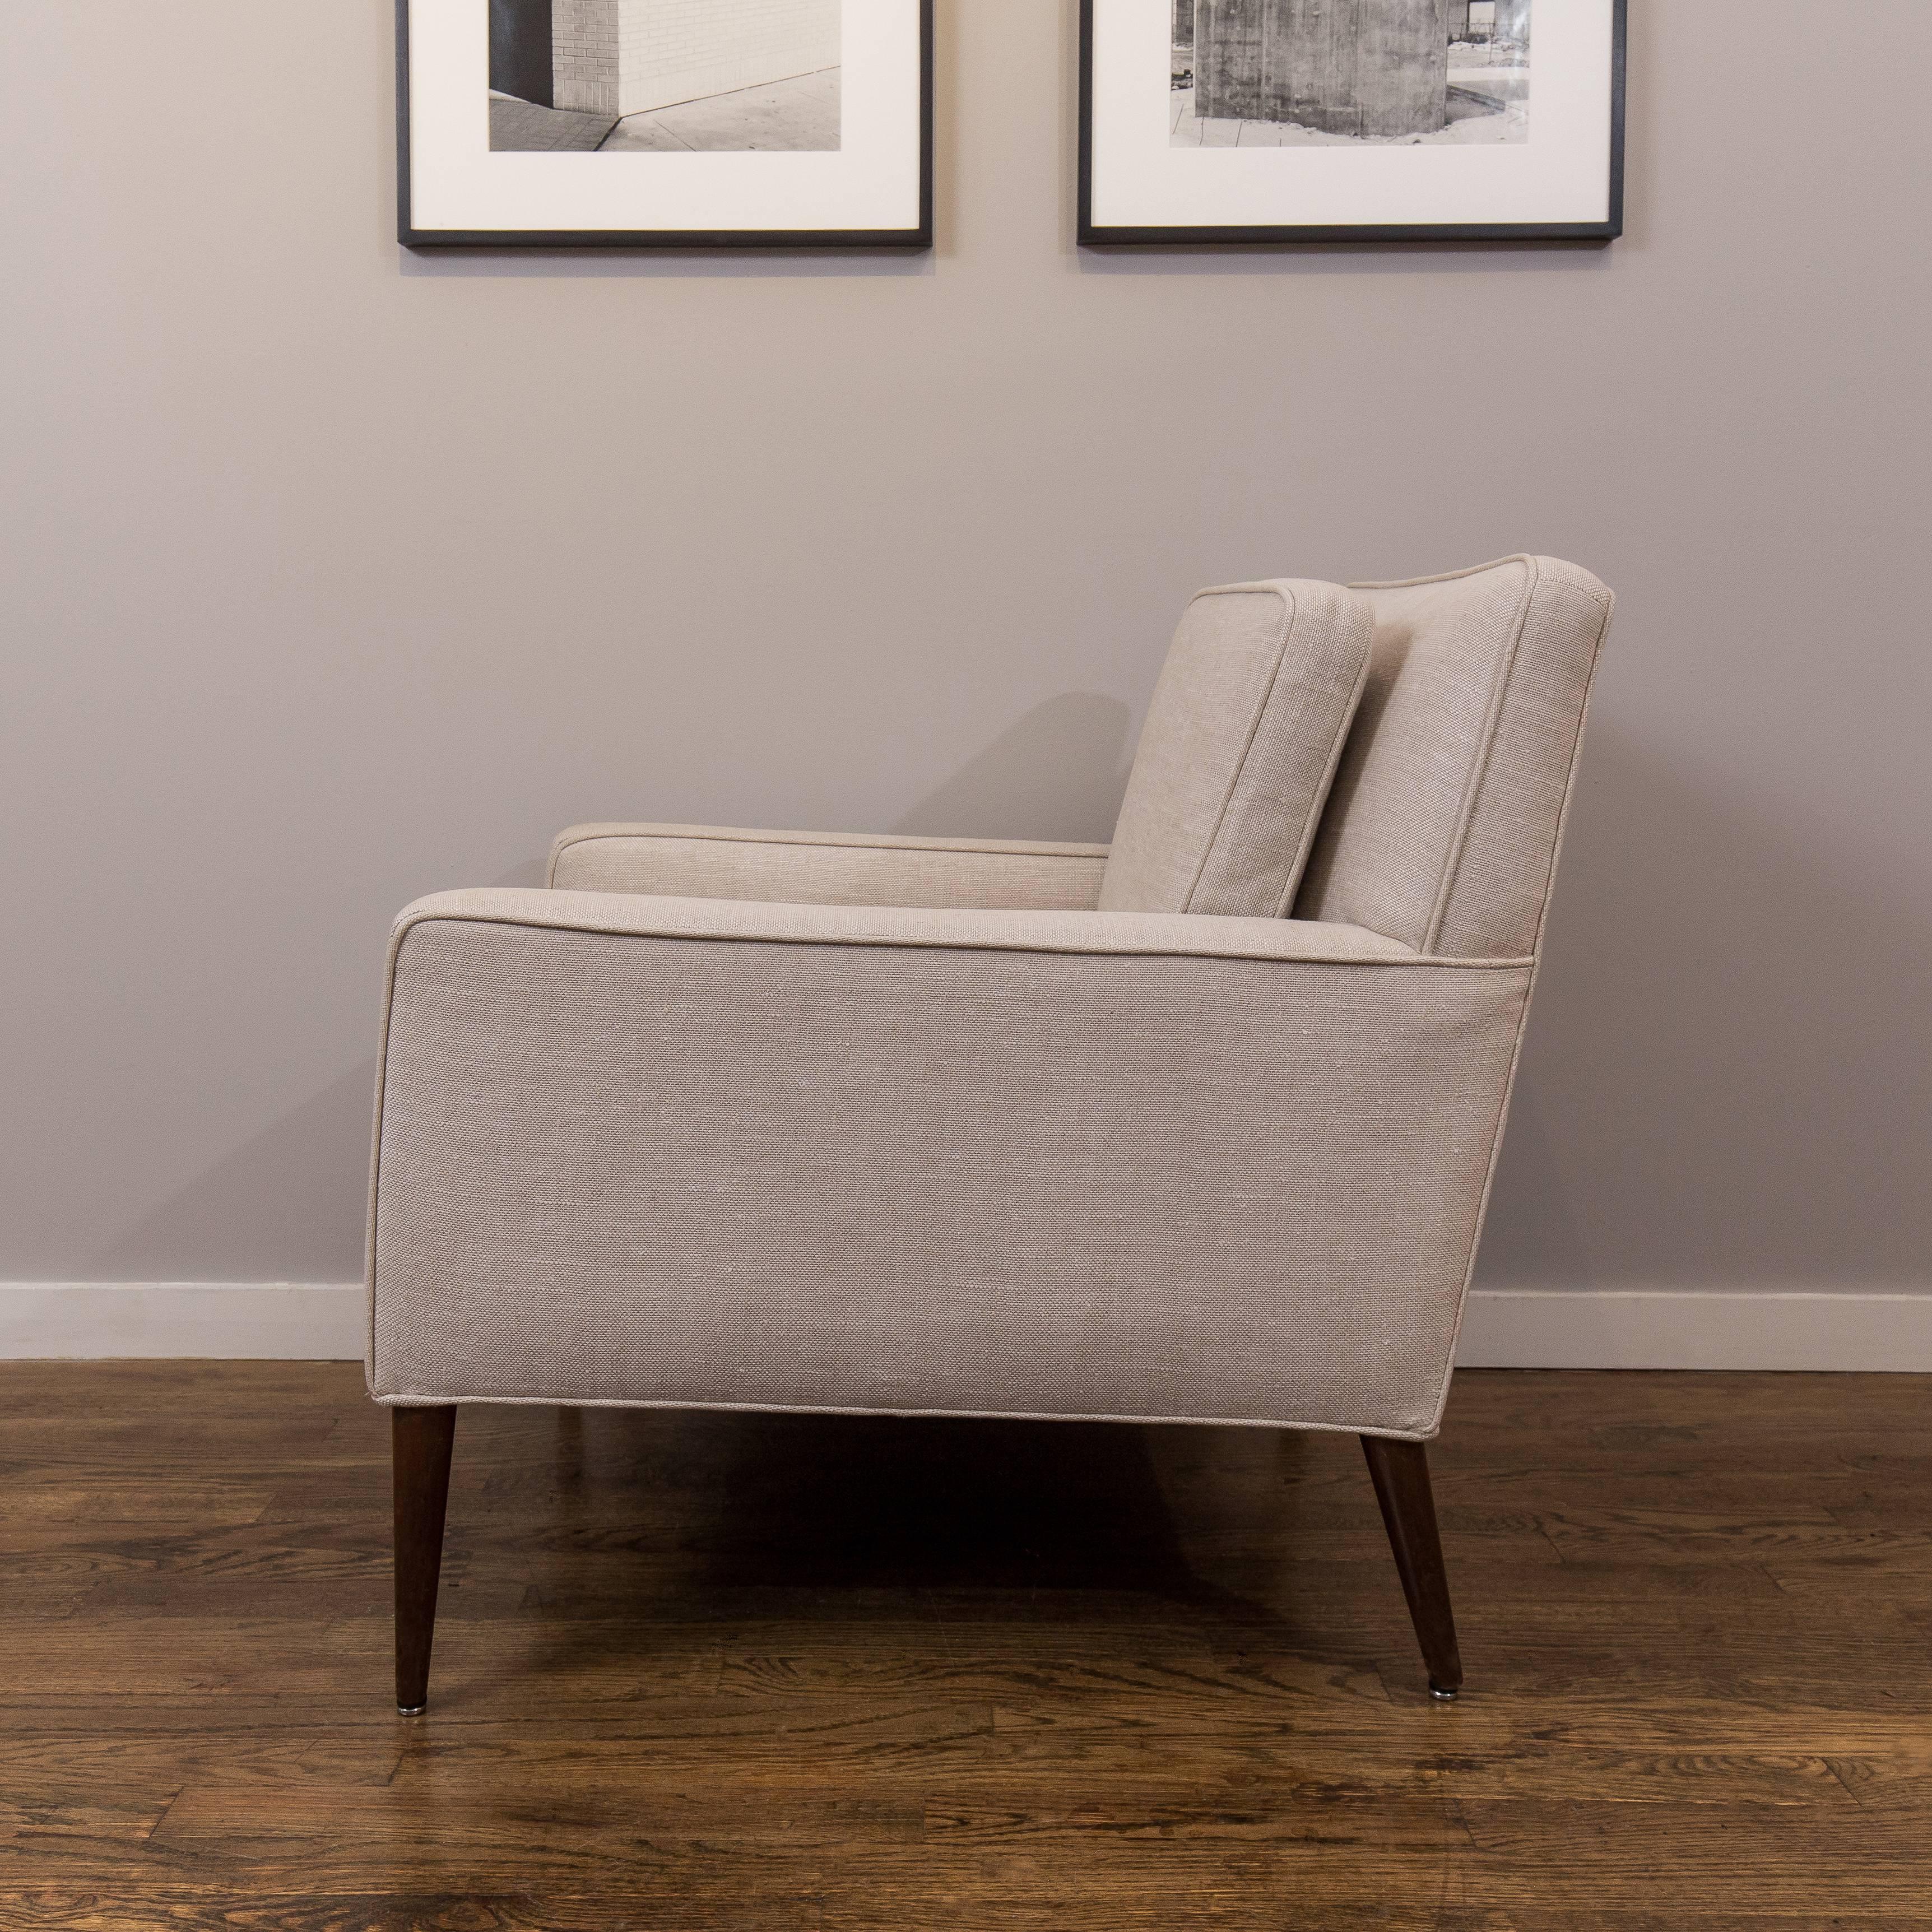 Paul McCobb single lounge chair and reupholstered in light grey linen.